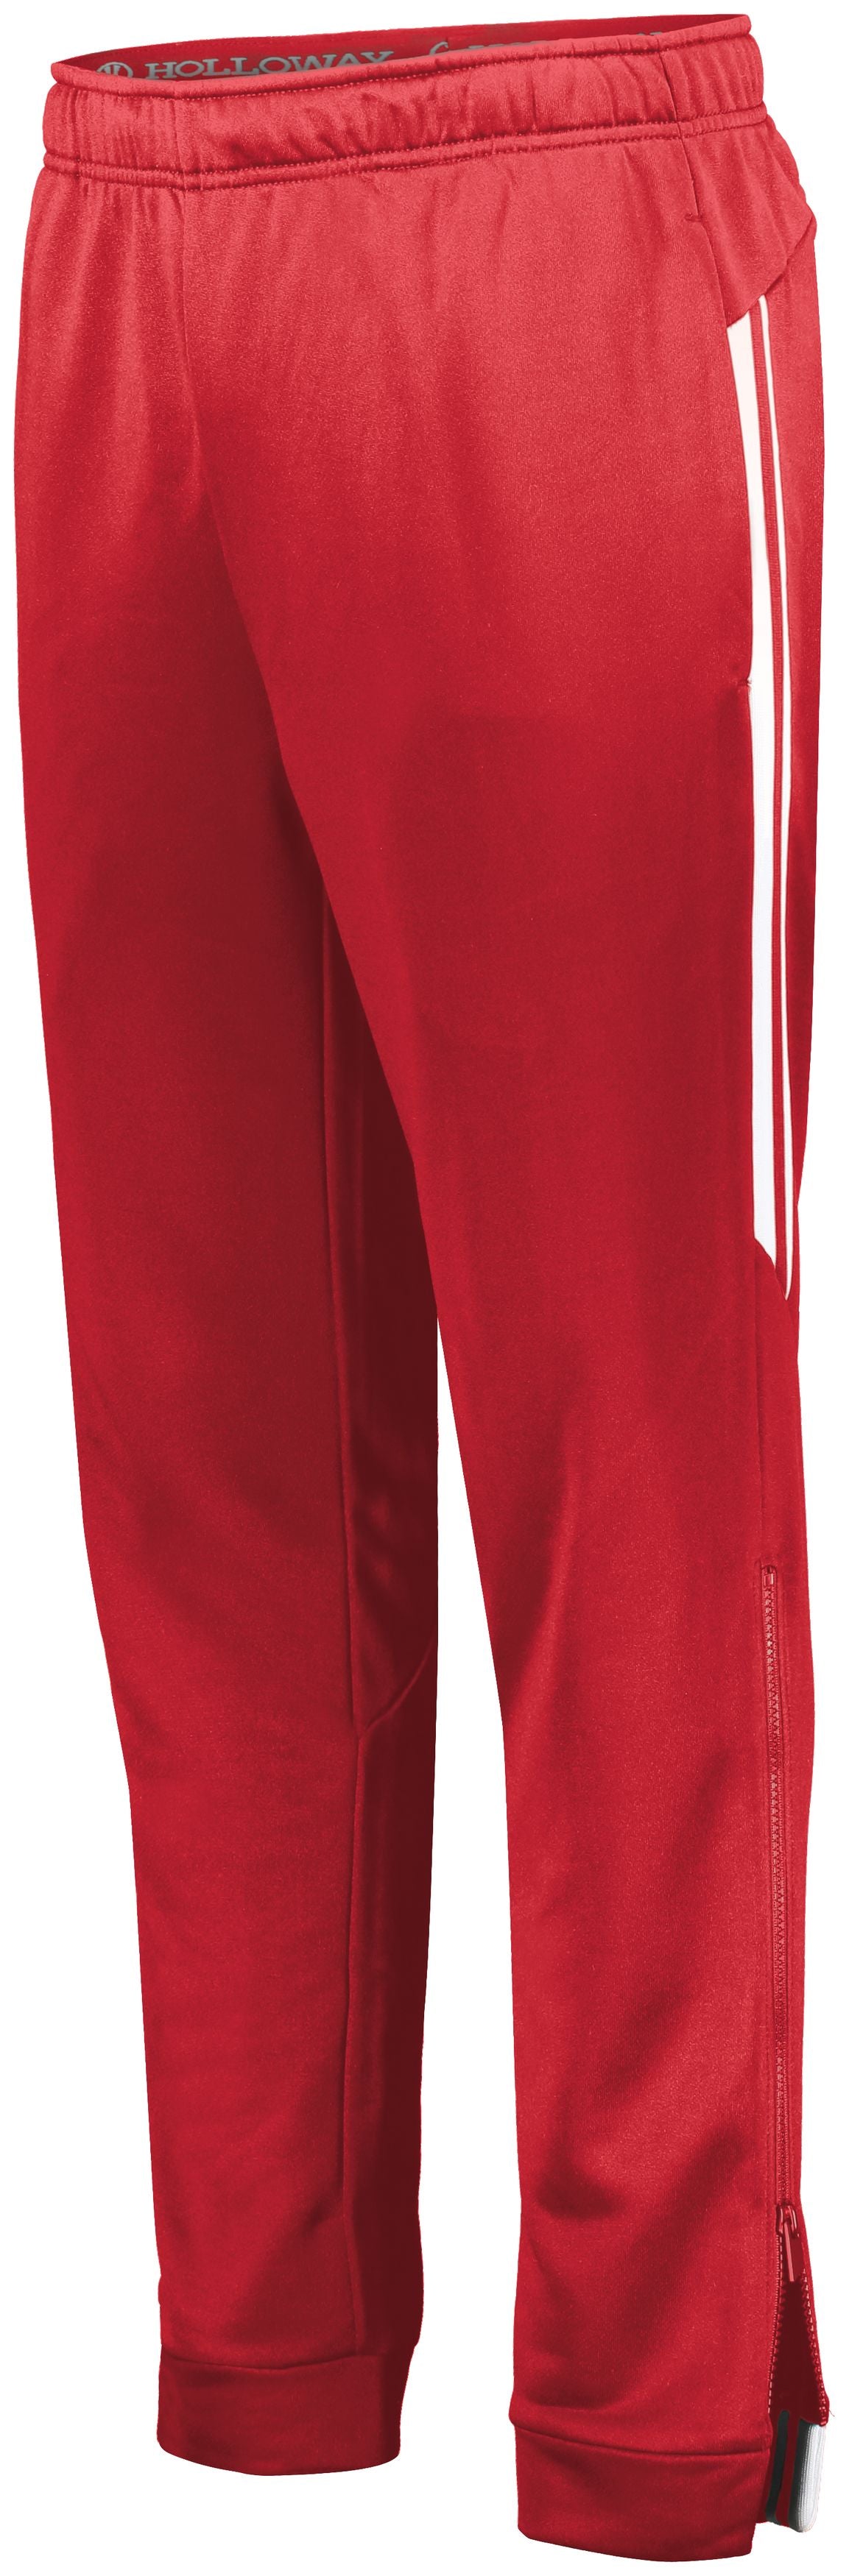 Holloway Retro Grade Pant in Scarlet/White  -Part of the Adult, Adult-Pants, Pants, Holloway product lines at KanaleyCreations.com